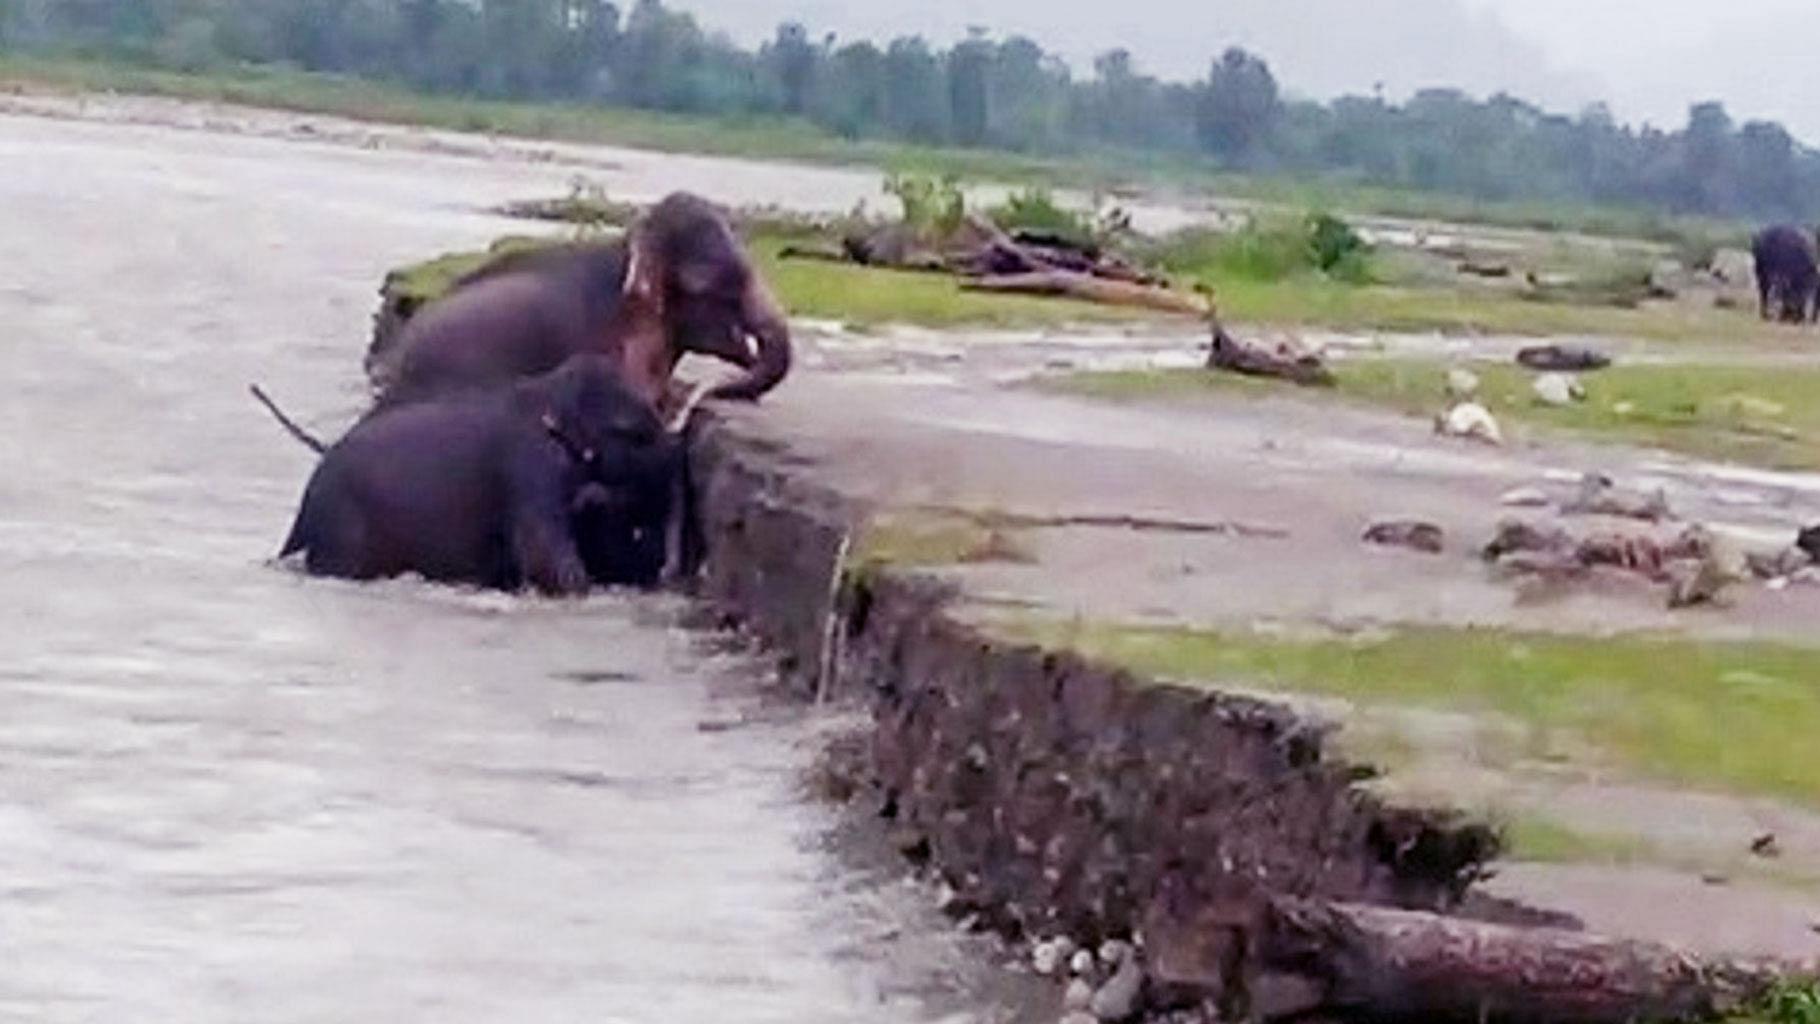 Assam floods has severely impacted wildlife. In many parts of the state, locals offered food to stranded elephants.